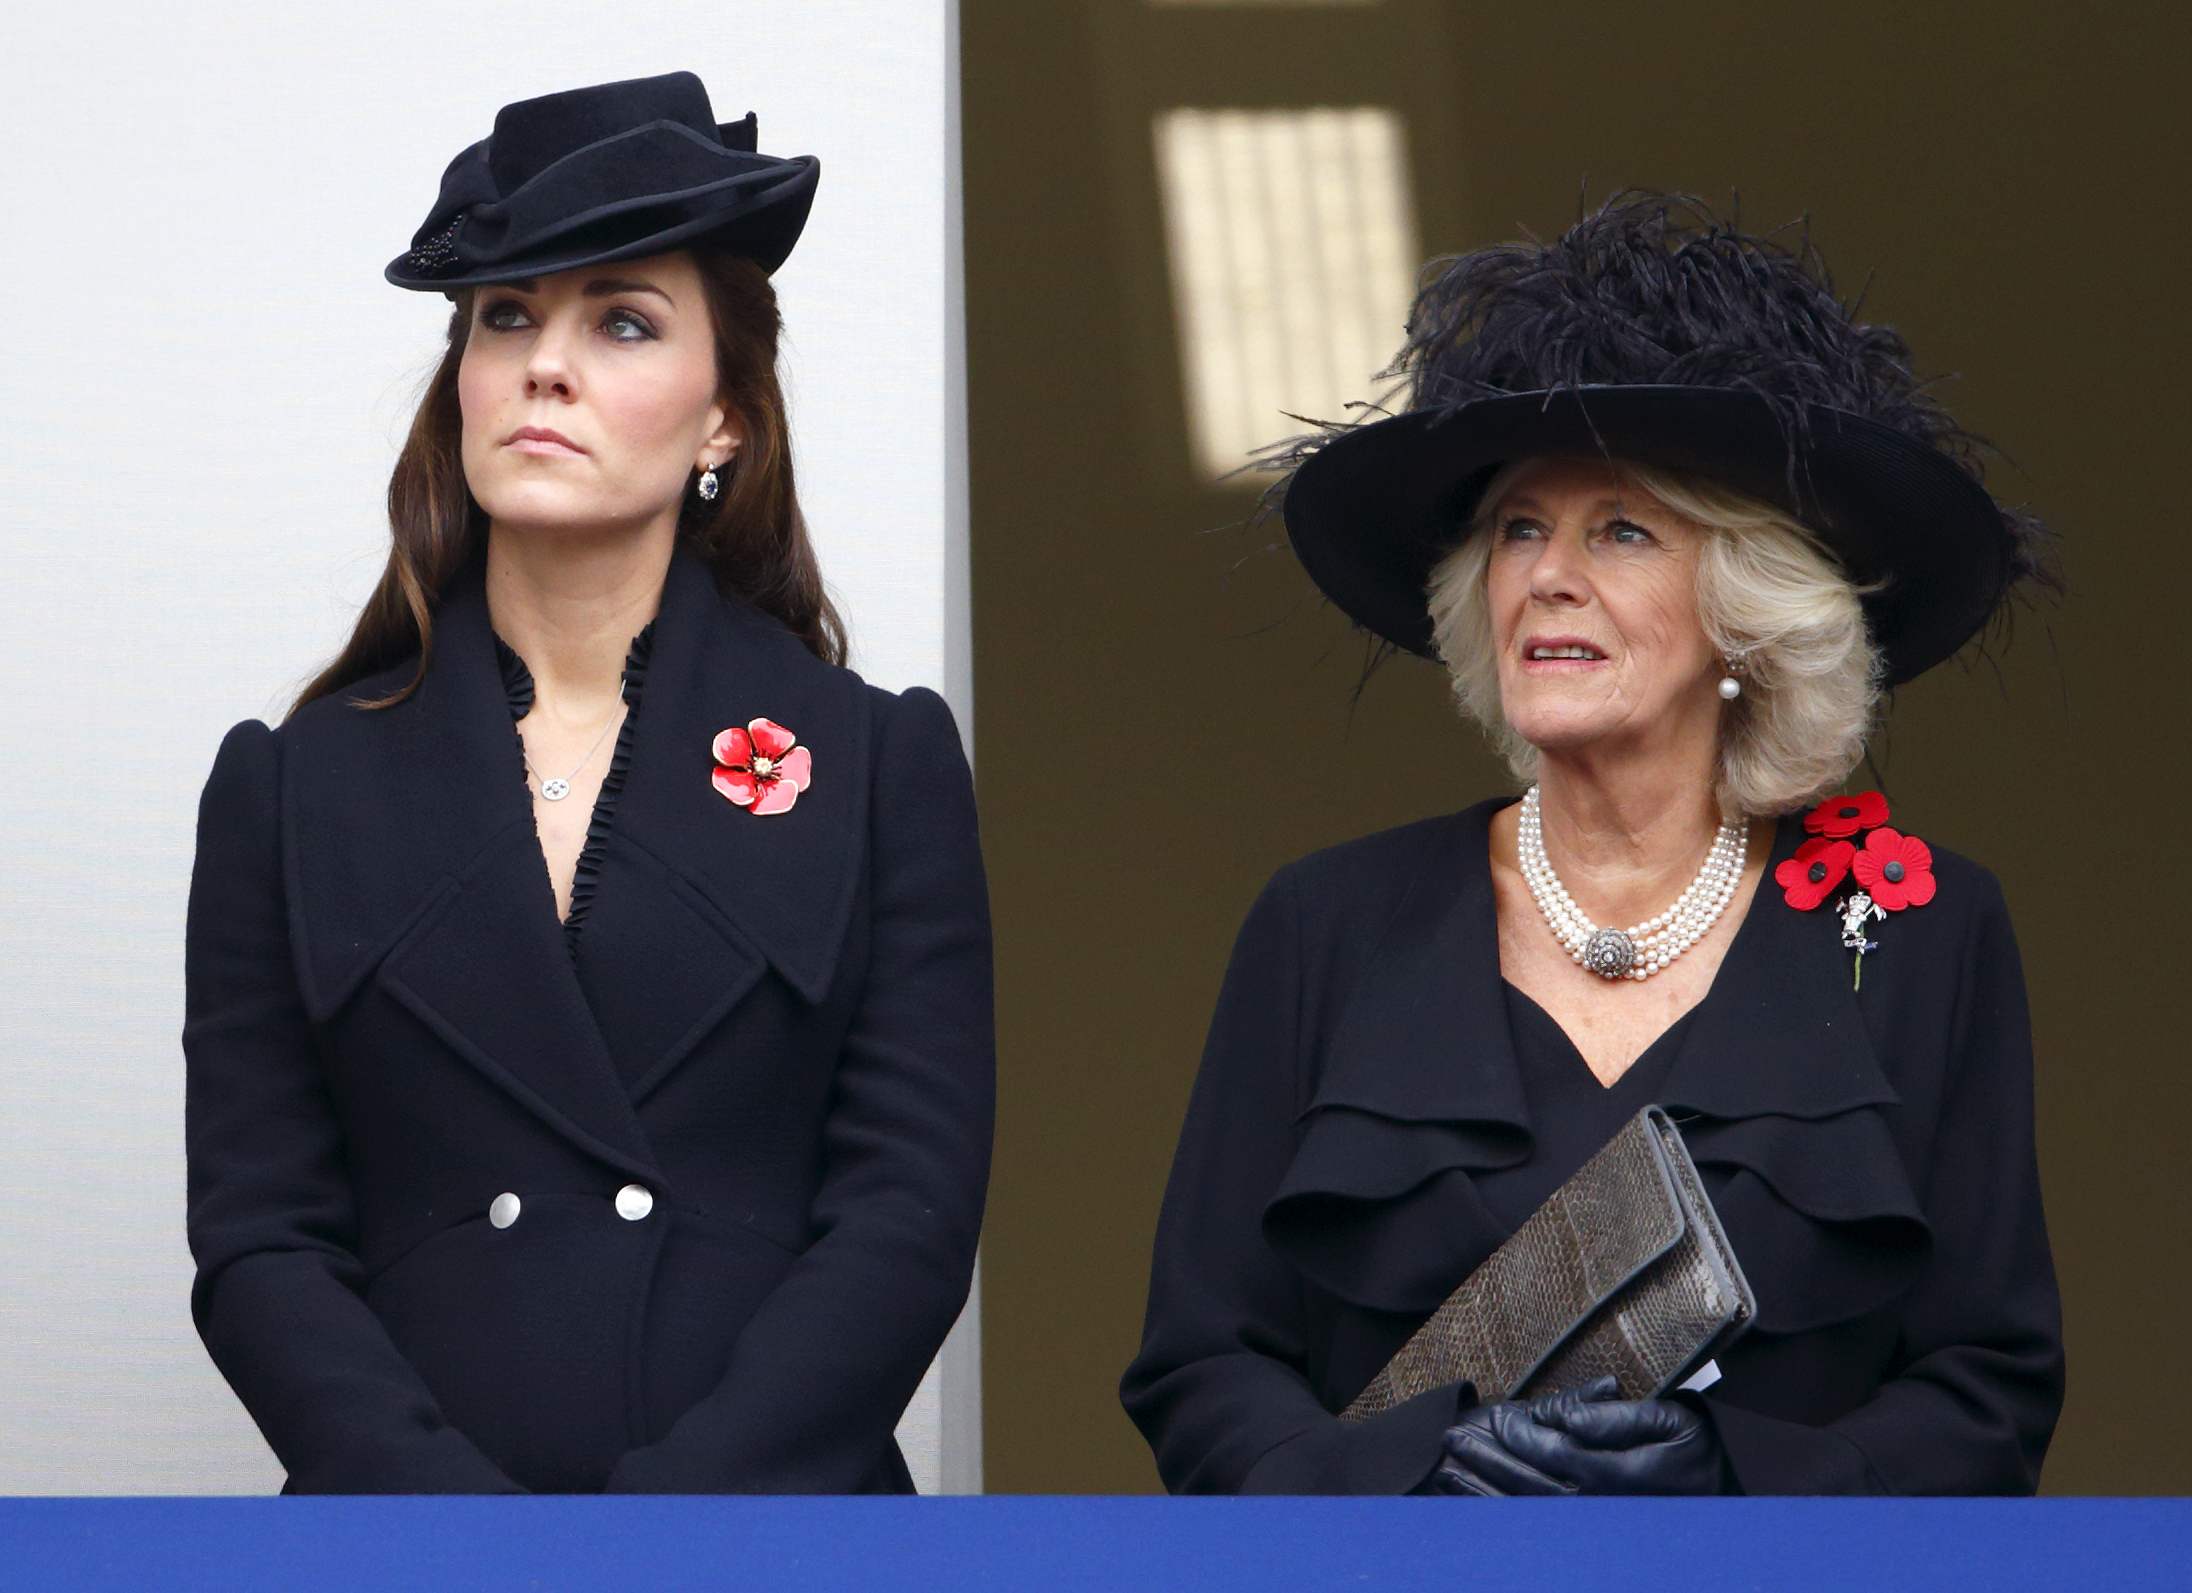 Catherine, Duchess of Cambridge, and Camilla, Duchess of Cornwall at the annual Remembrance Sunday Service on November 9, 2014, in London, England | Source: Getty Images